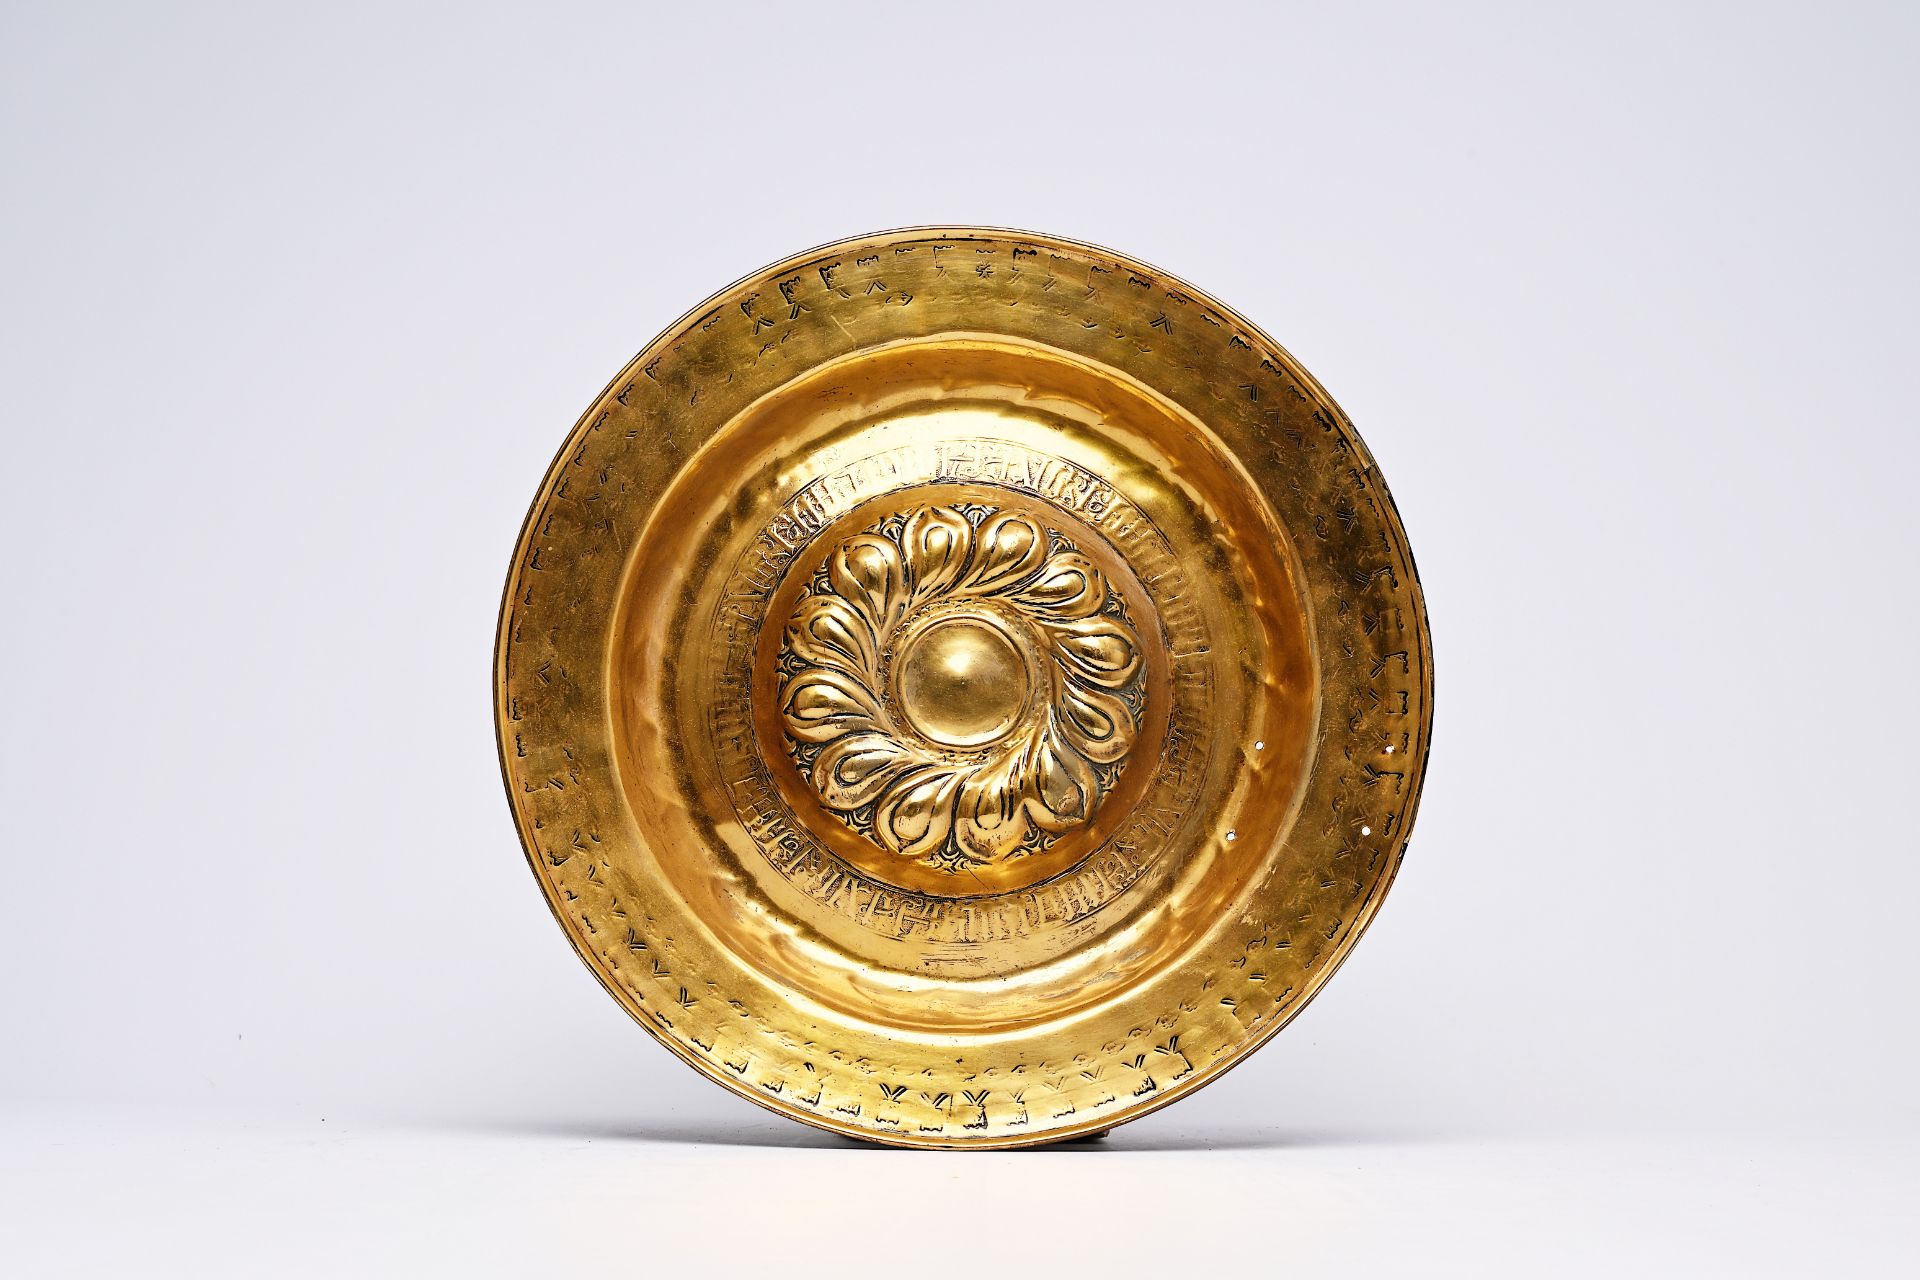 A large brass alms dish, probably Nuremberg, Germany, 16th/17th C.